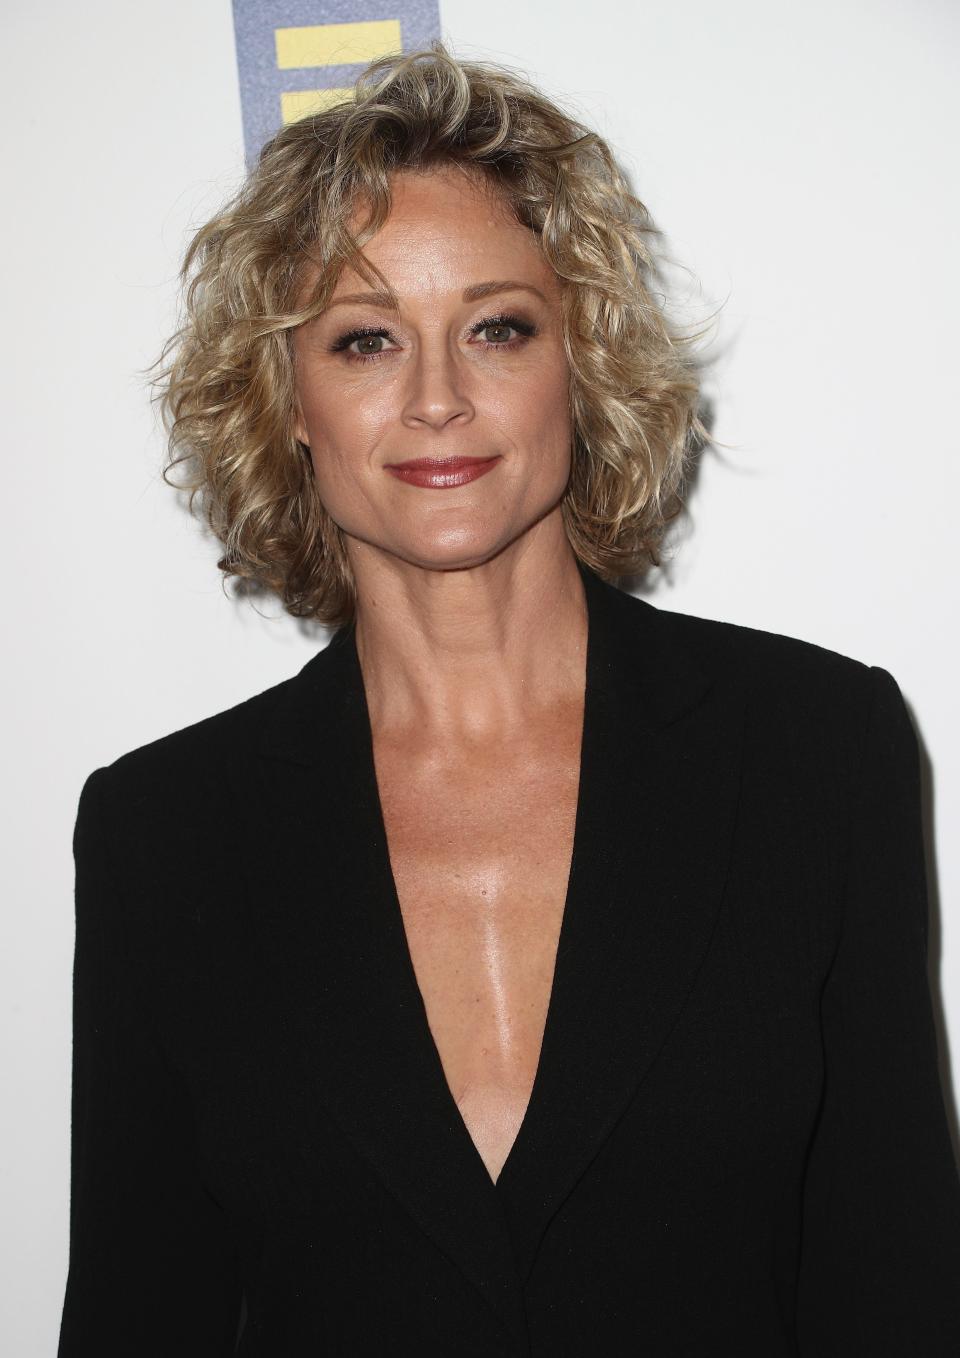 Teri Polo attends the Human Rights Campaign 2018 Los Angeles gala dinner in Los Angeles in 2018.